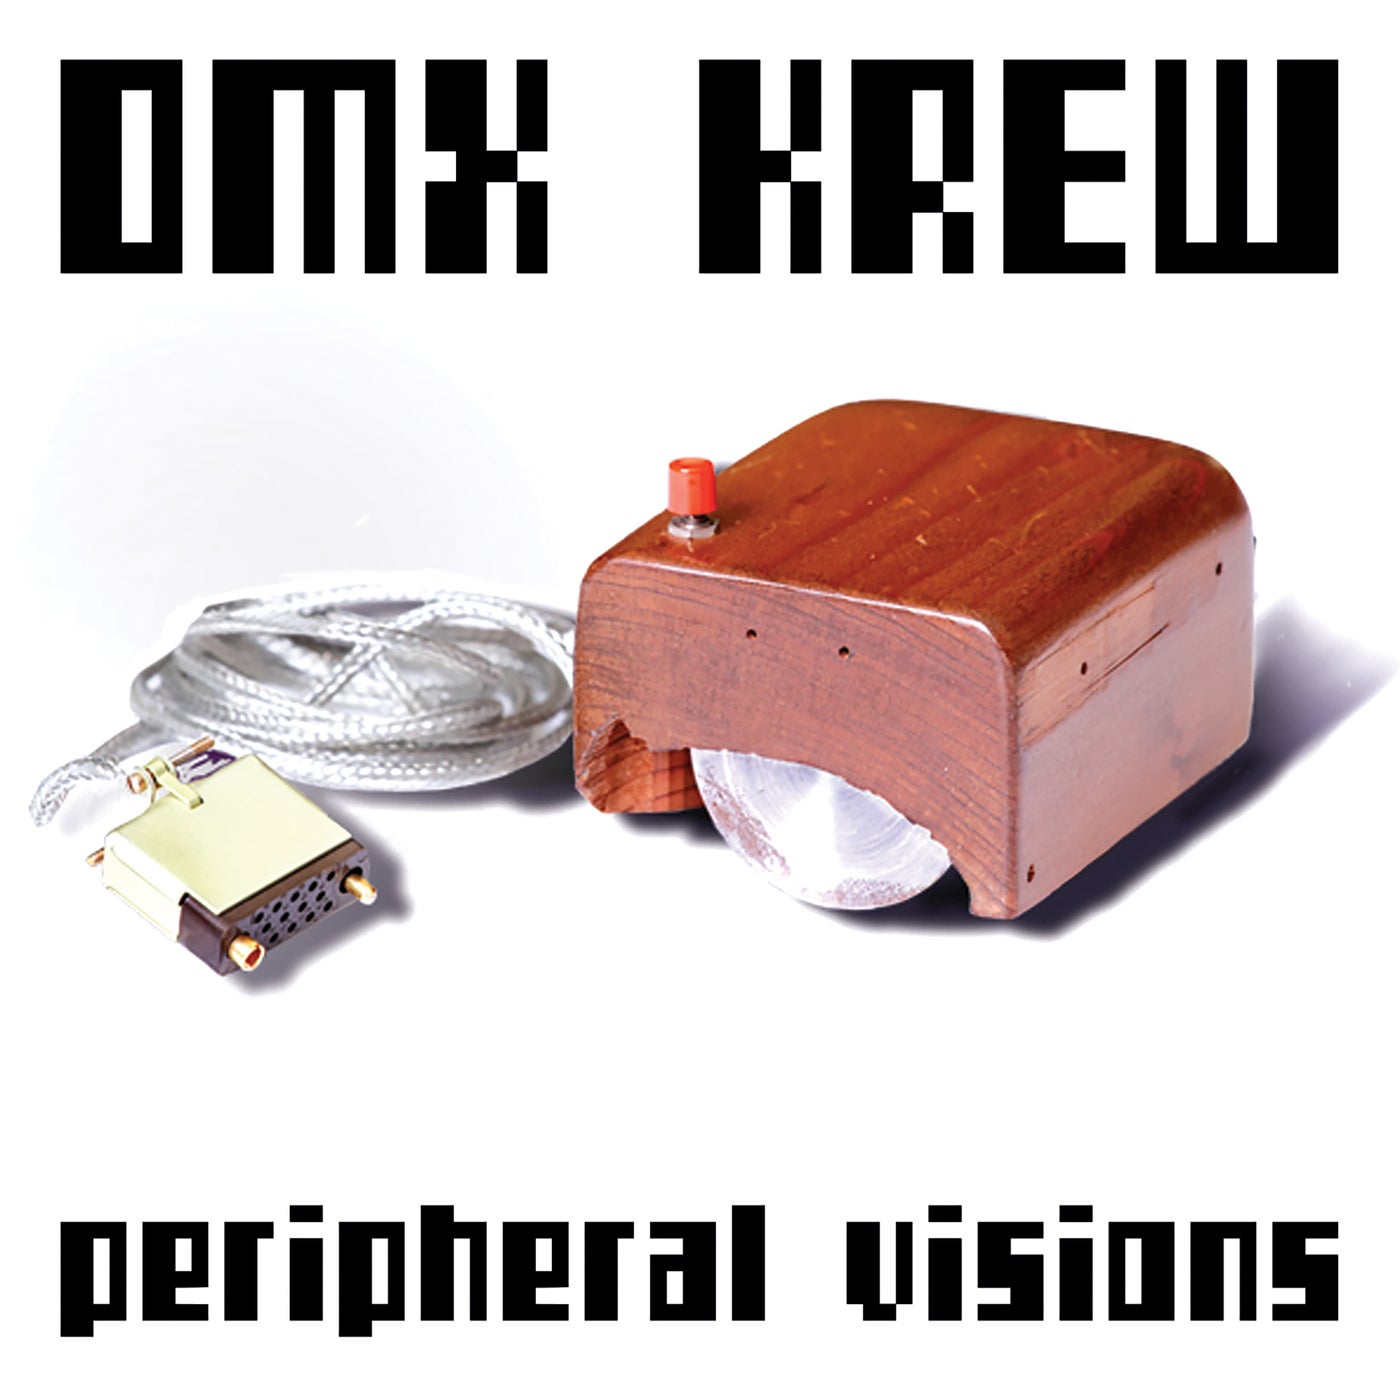 DMX Krew - Peripheral Visions [Byrd Out]